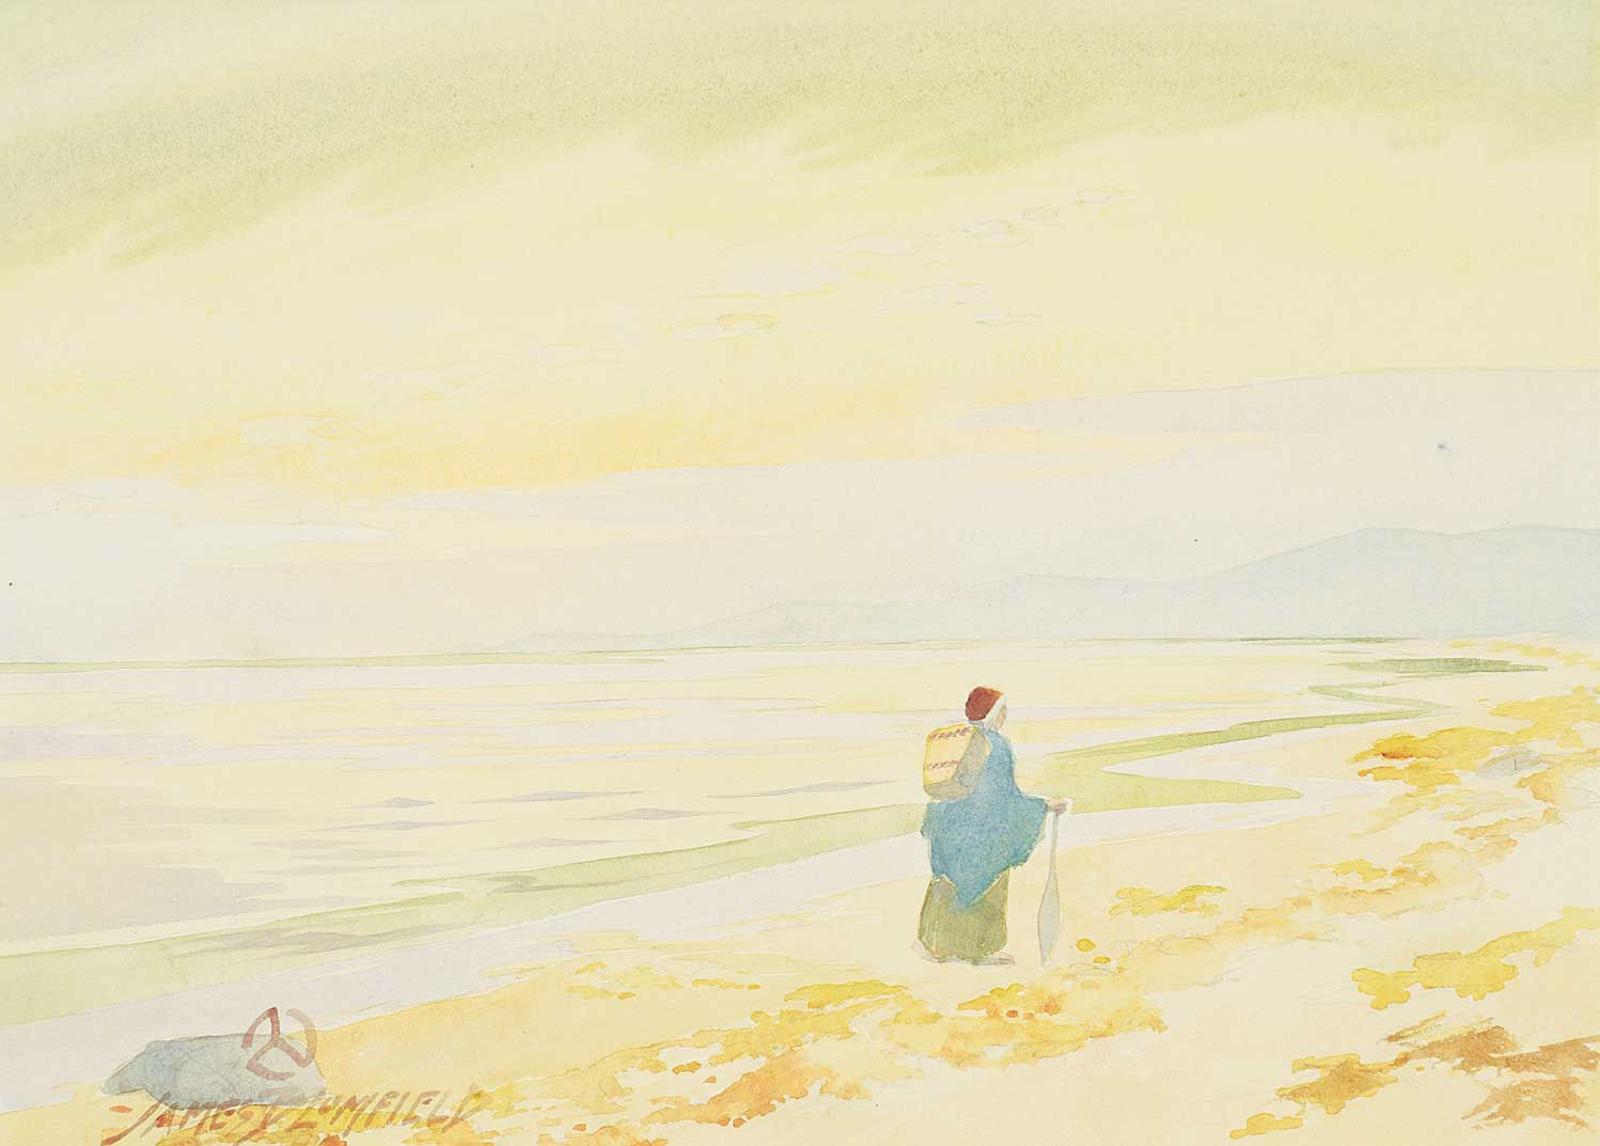 James Jerris Blomfield (1872-1951) - Untitled - A Stroll Down the Beach [possibly Emily Carr]